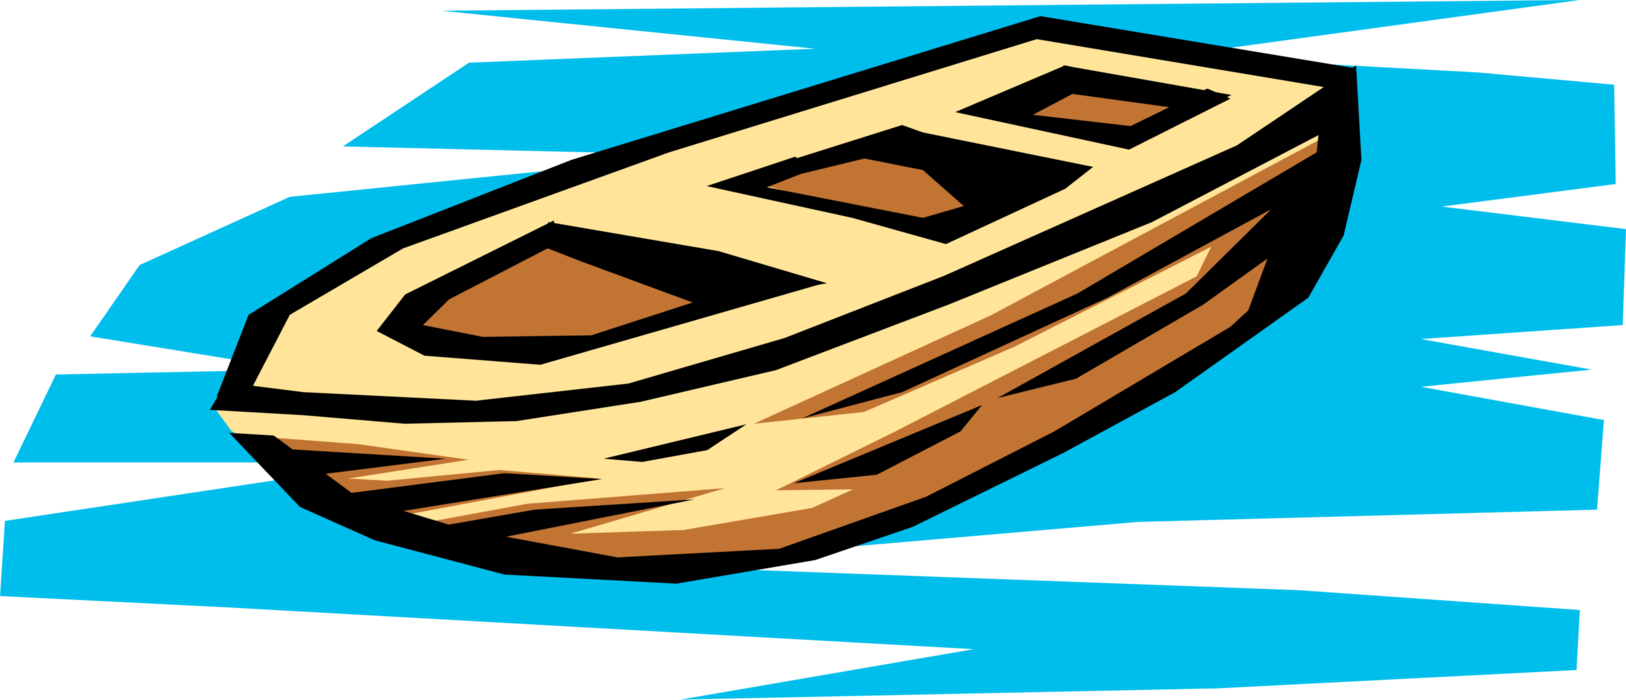 Vector Illustration of Wooden Rowboat or Row Boat for Rowing on Water